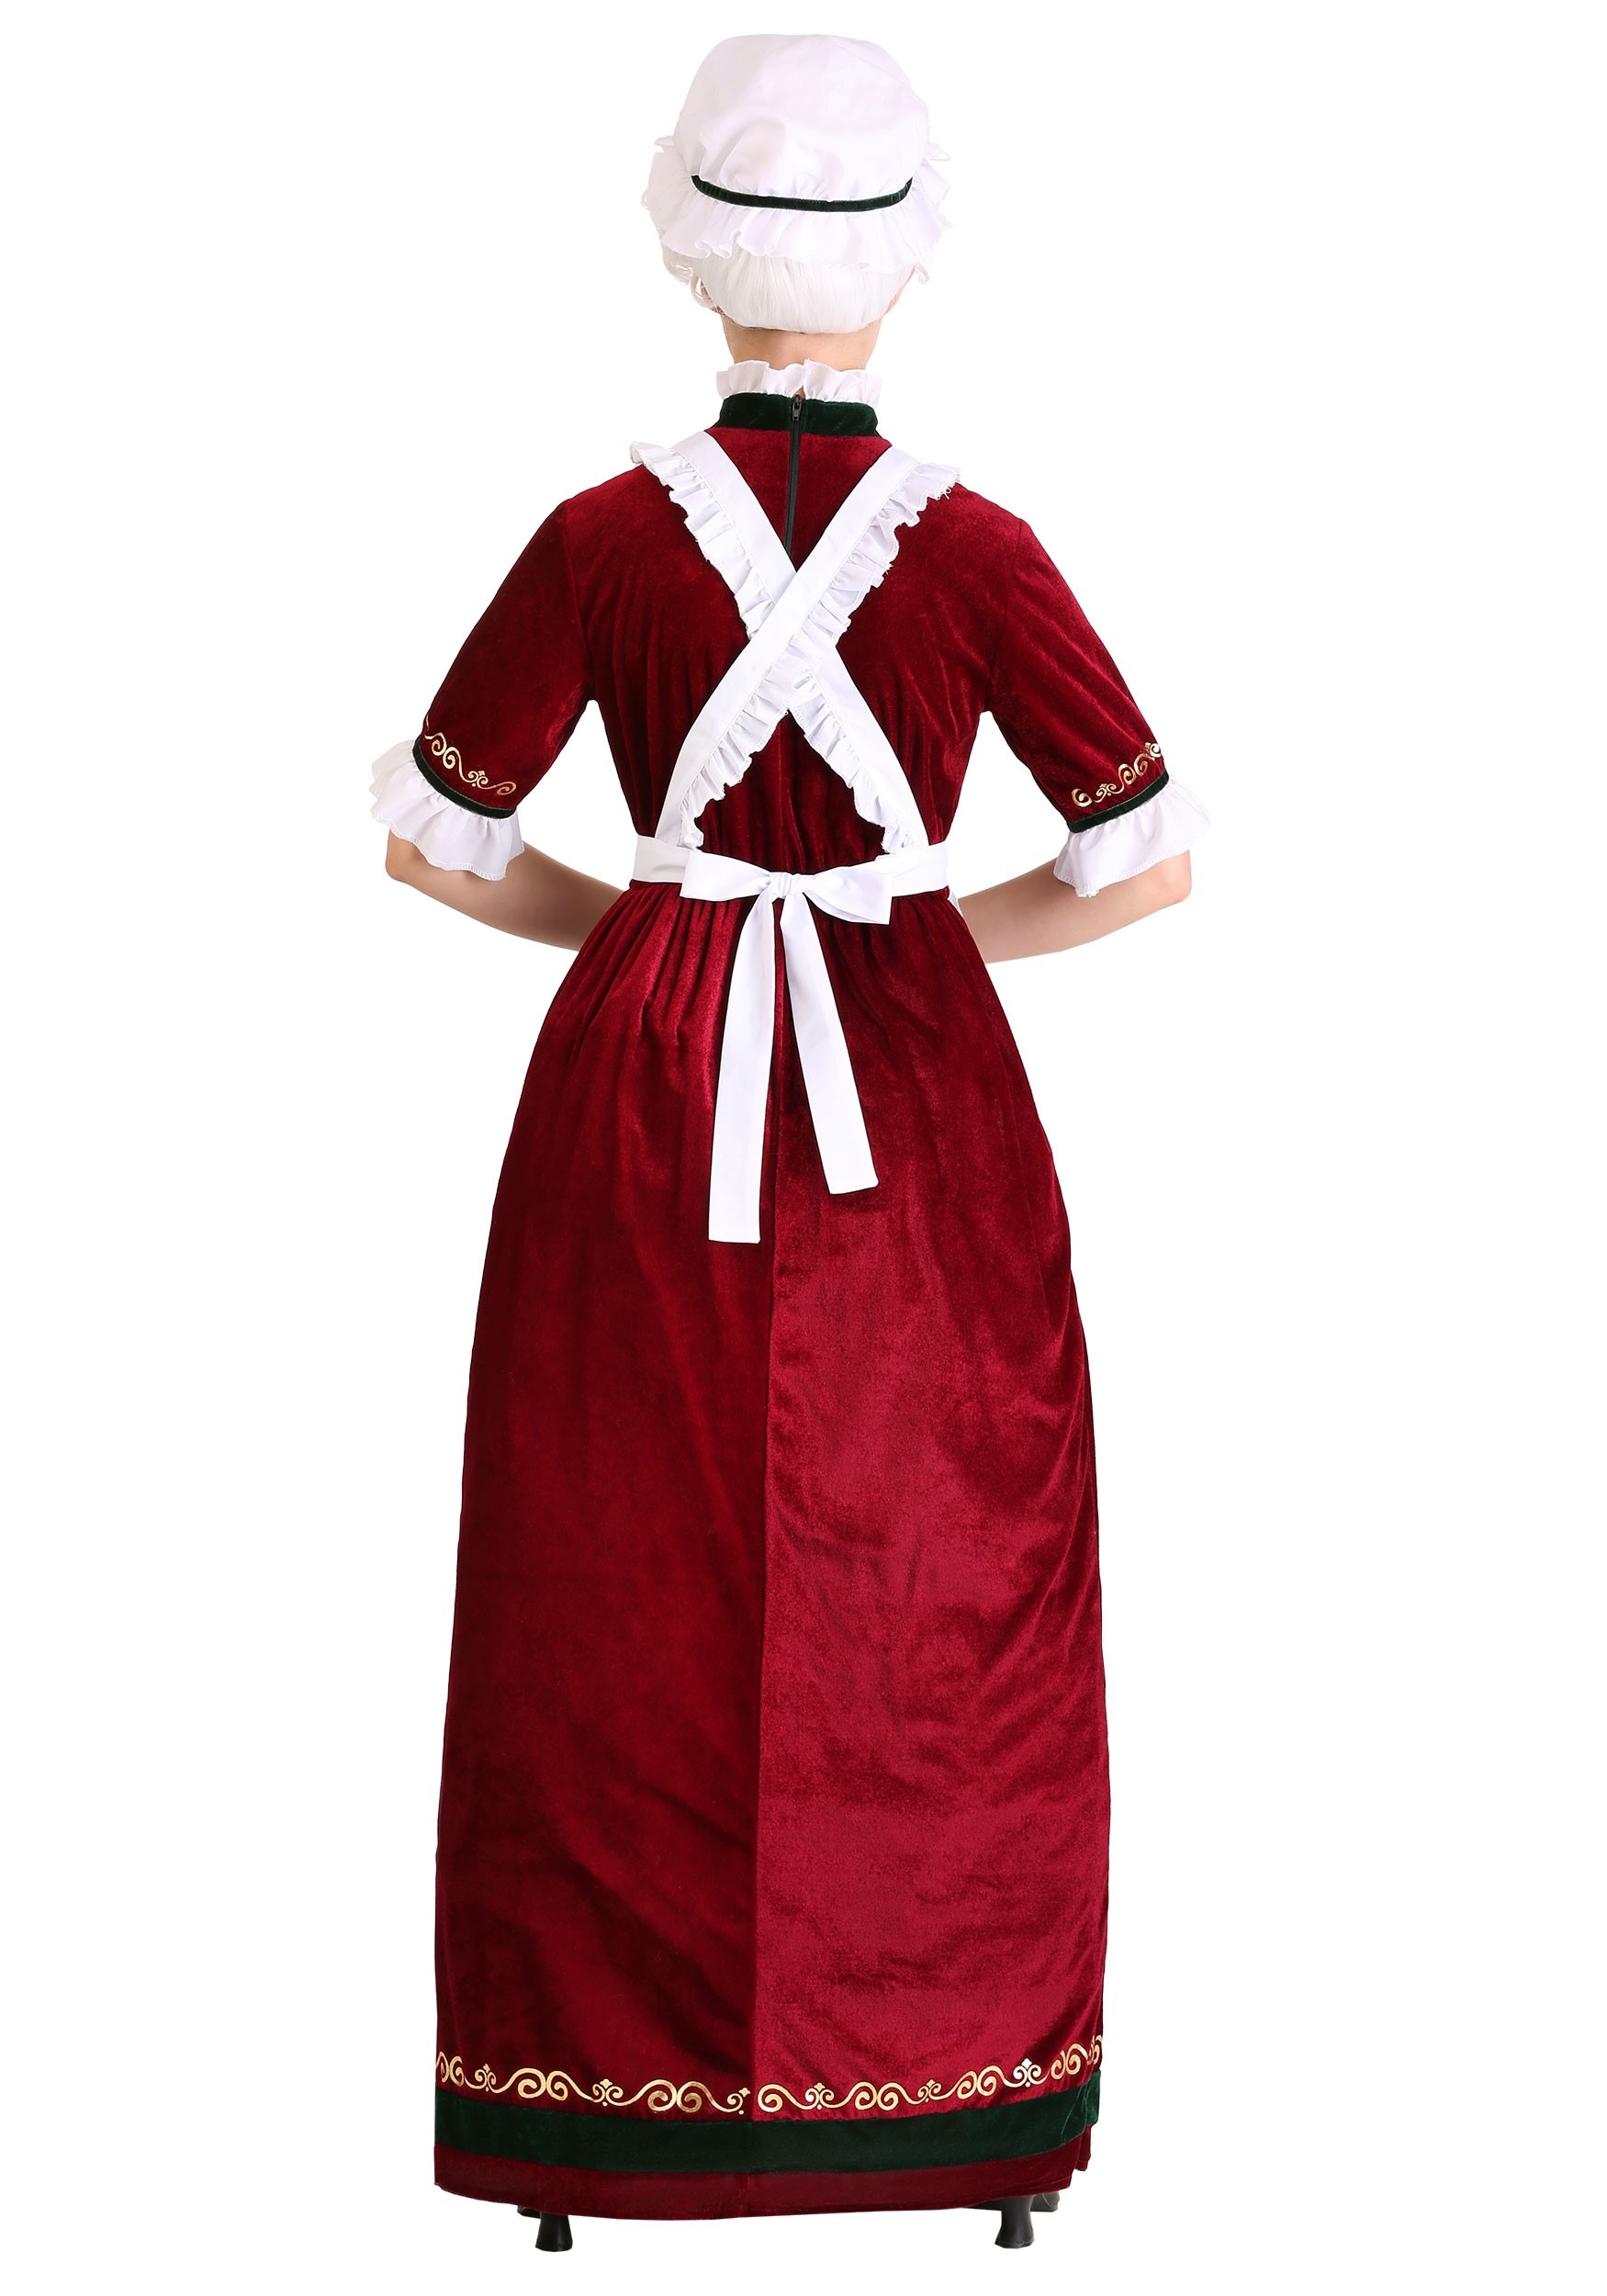 Mrs. Claus Fancy Dress Costume Holiday